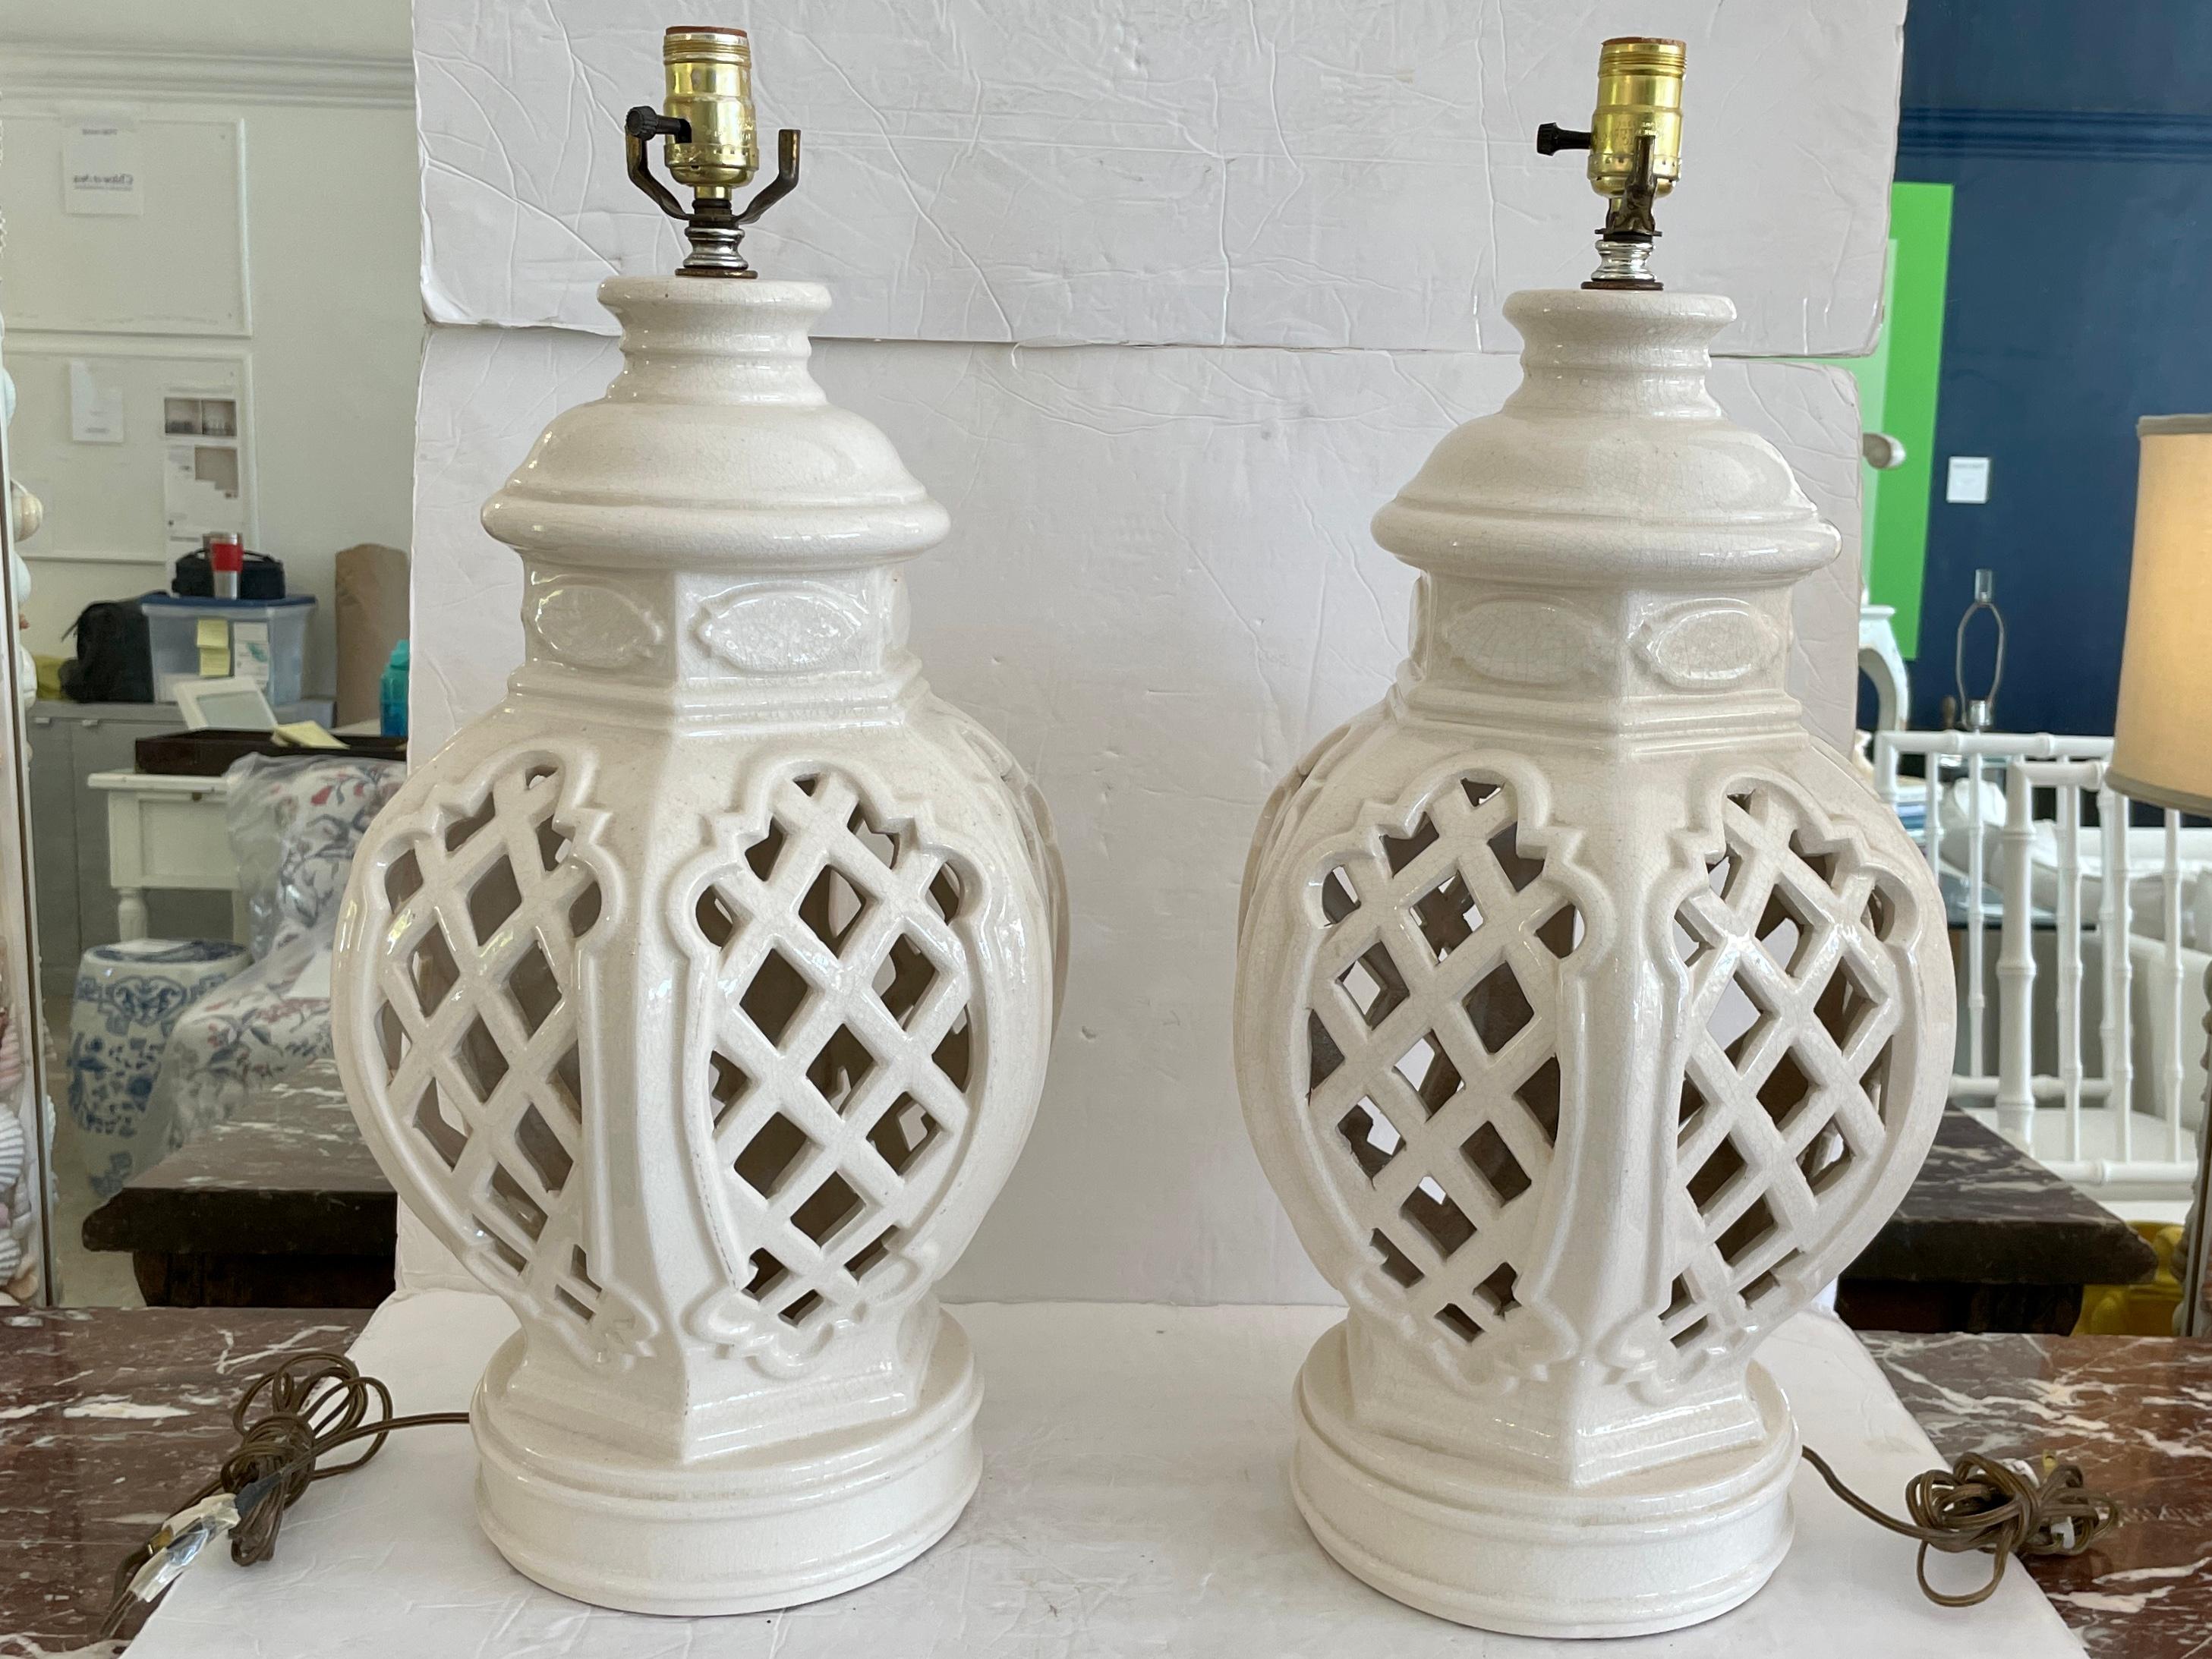 Ceramic Hollywood Regency Lattice Ginger Jar Table Lamps, a Pair For Sale